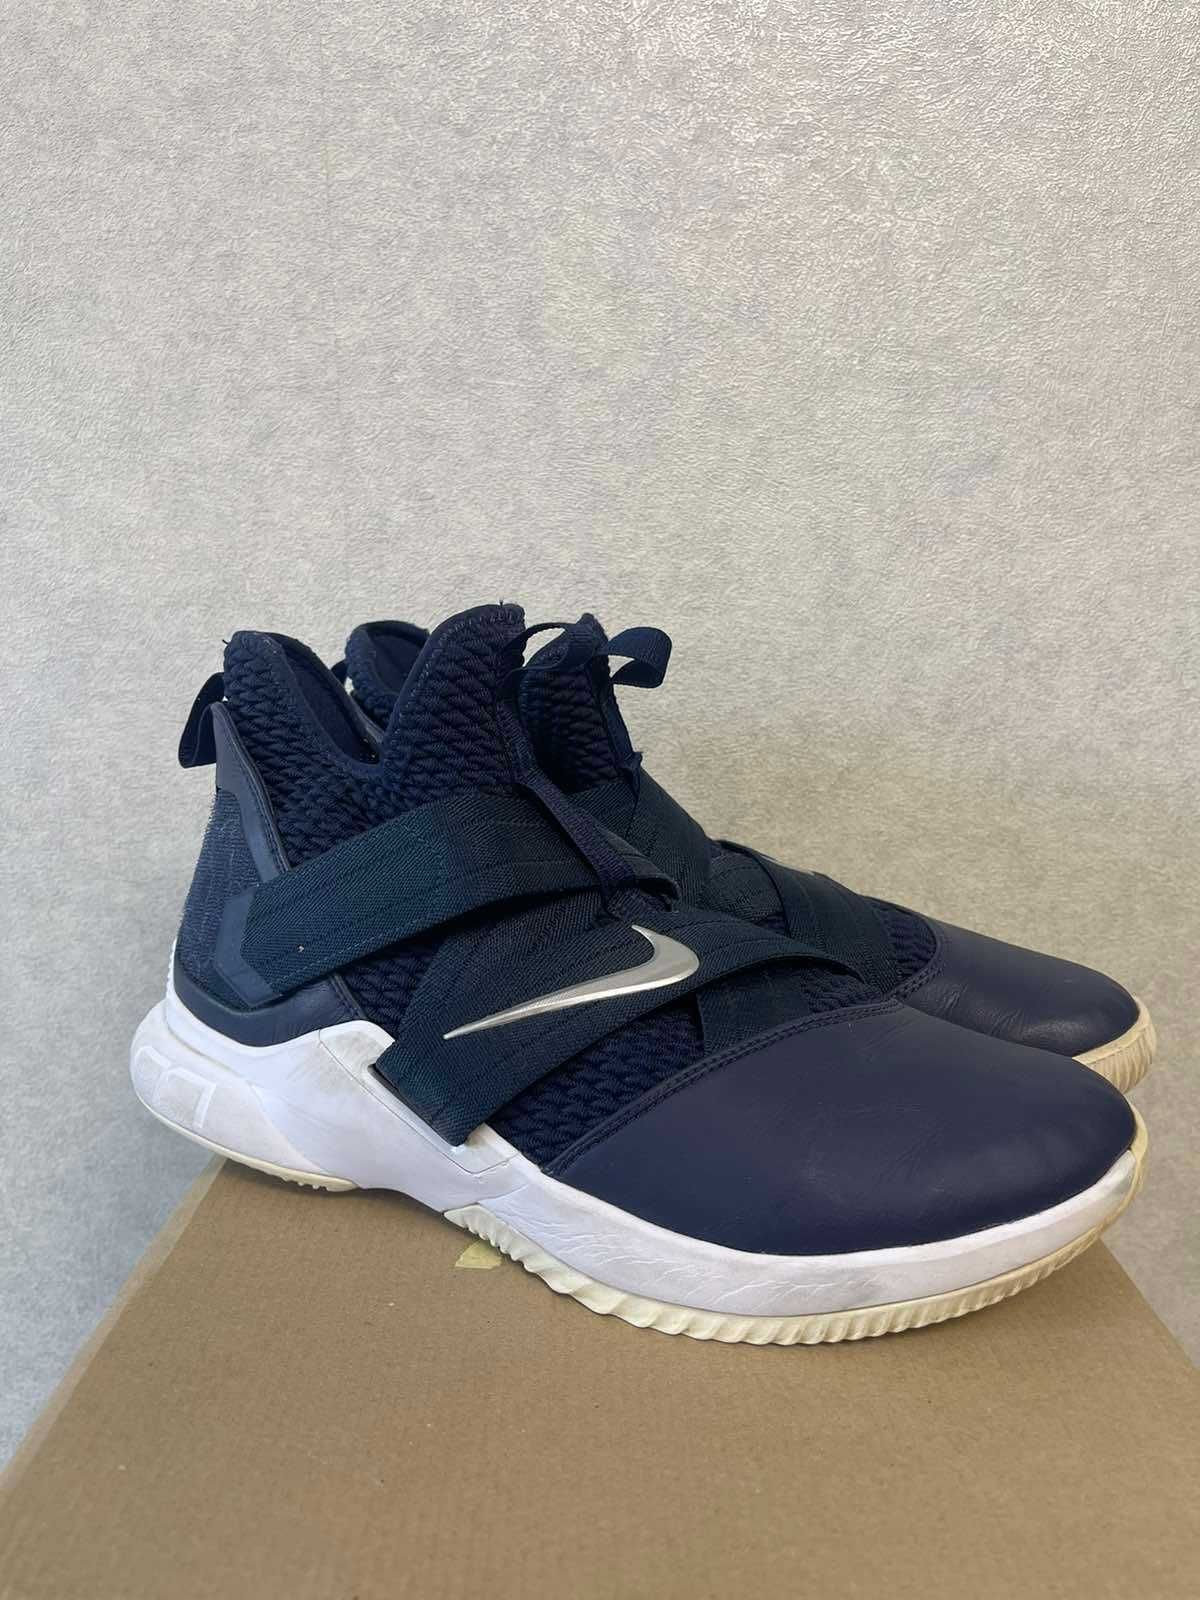 Nike LeBron Soldier XII [US 11|29 cm]